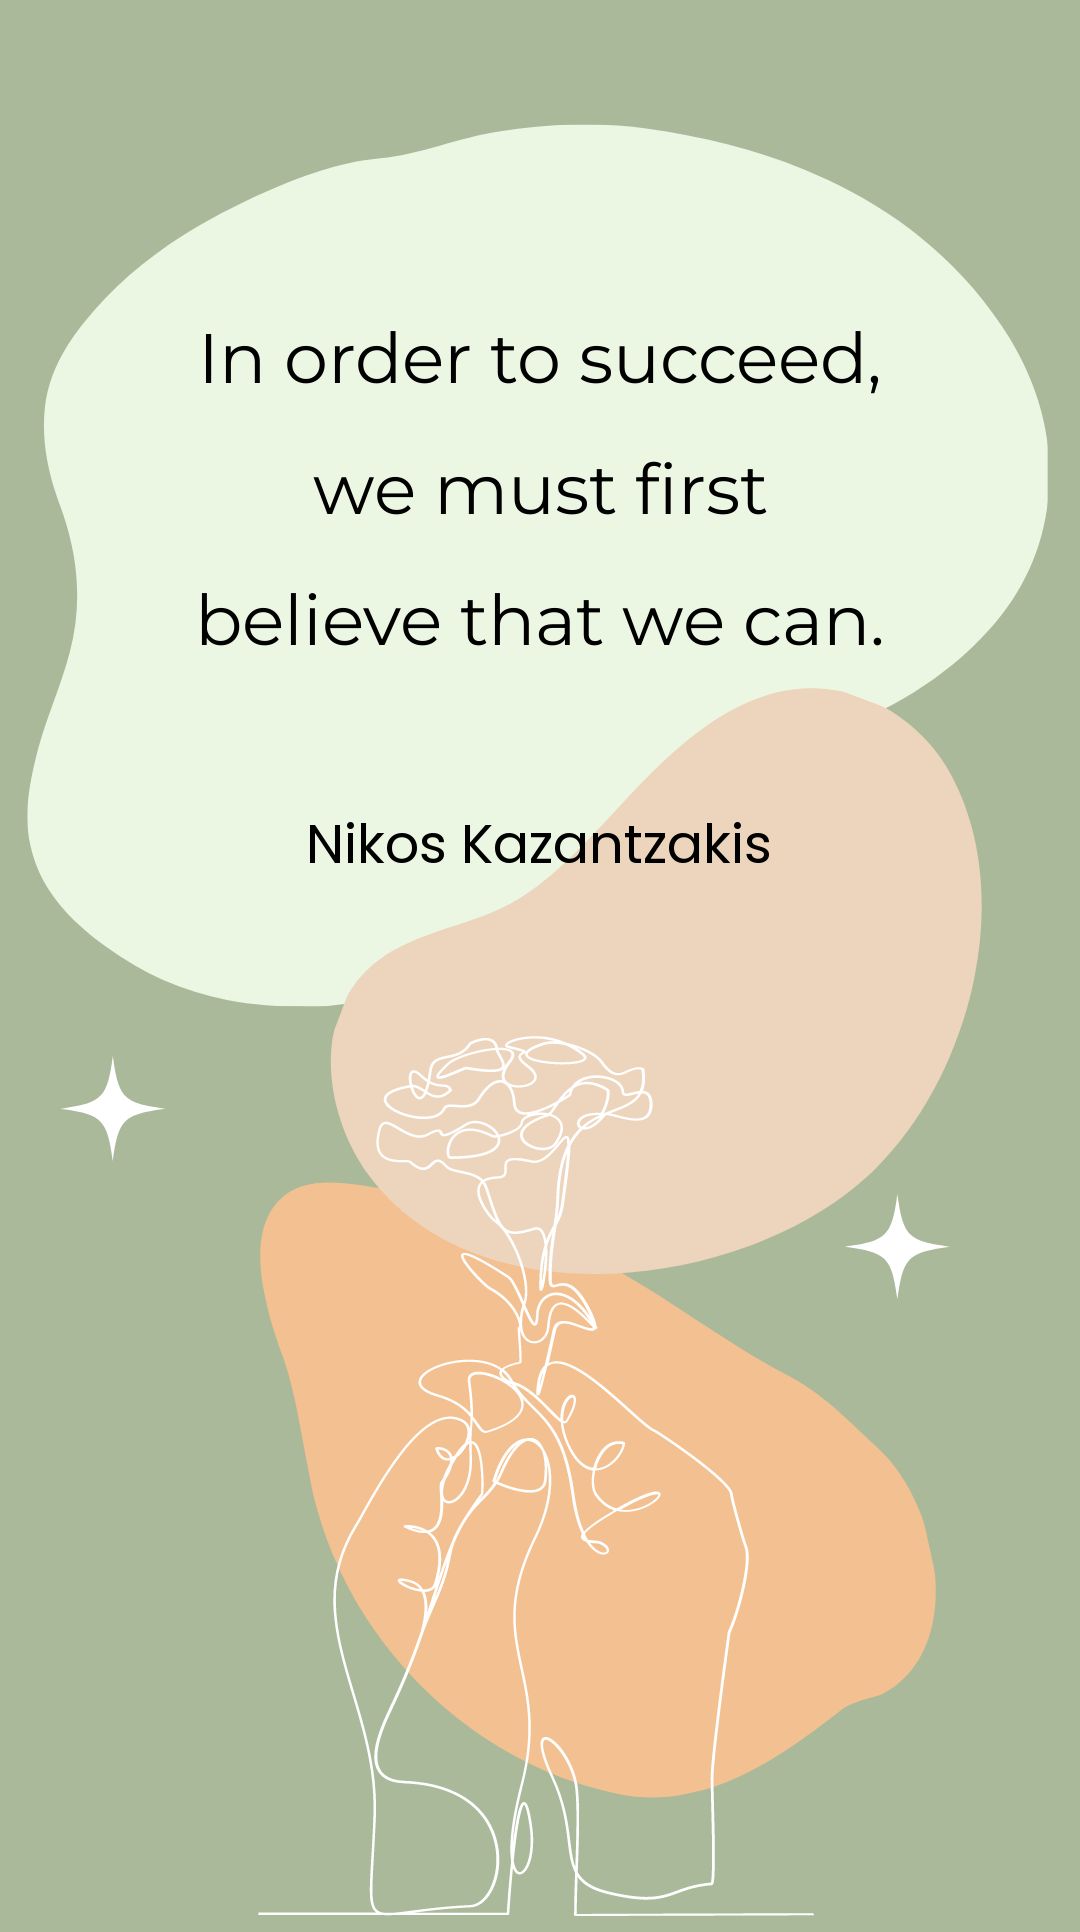 Nikos Kazantzakis - In order to succeed, we must first believe that we can.